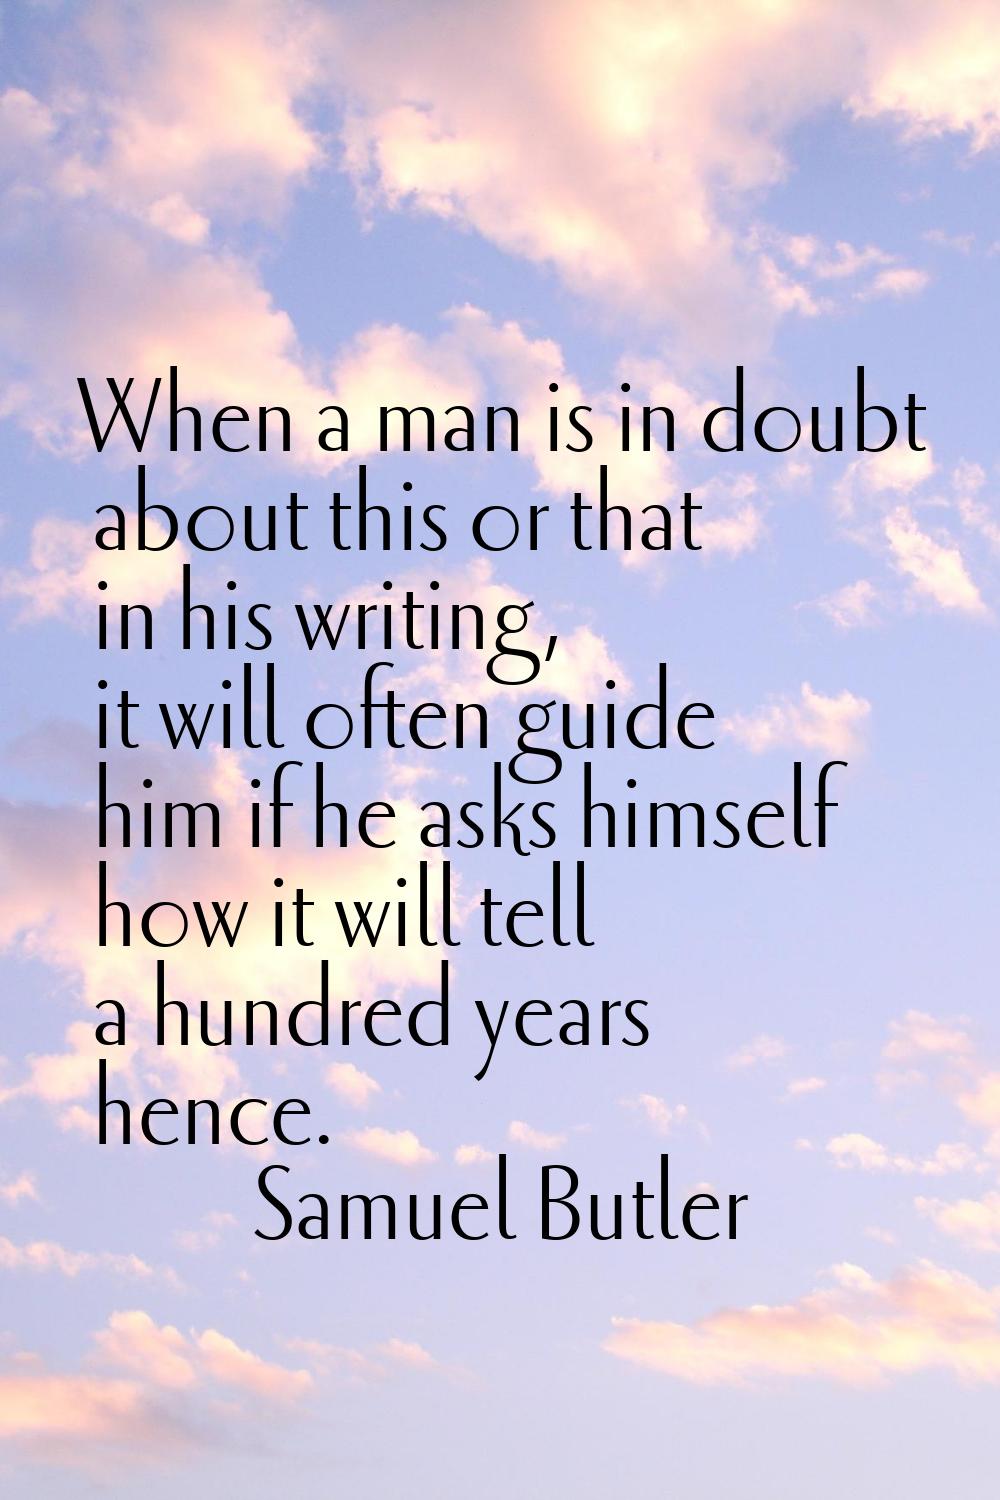 When a man is in doubt about this or that in his writing, it will often guide him if he asks himsel